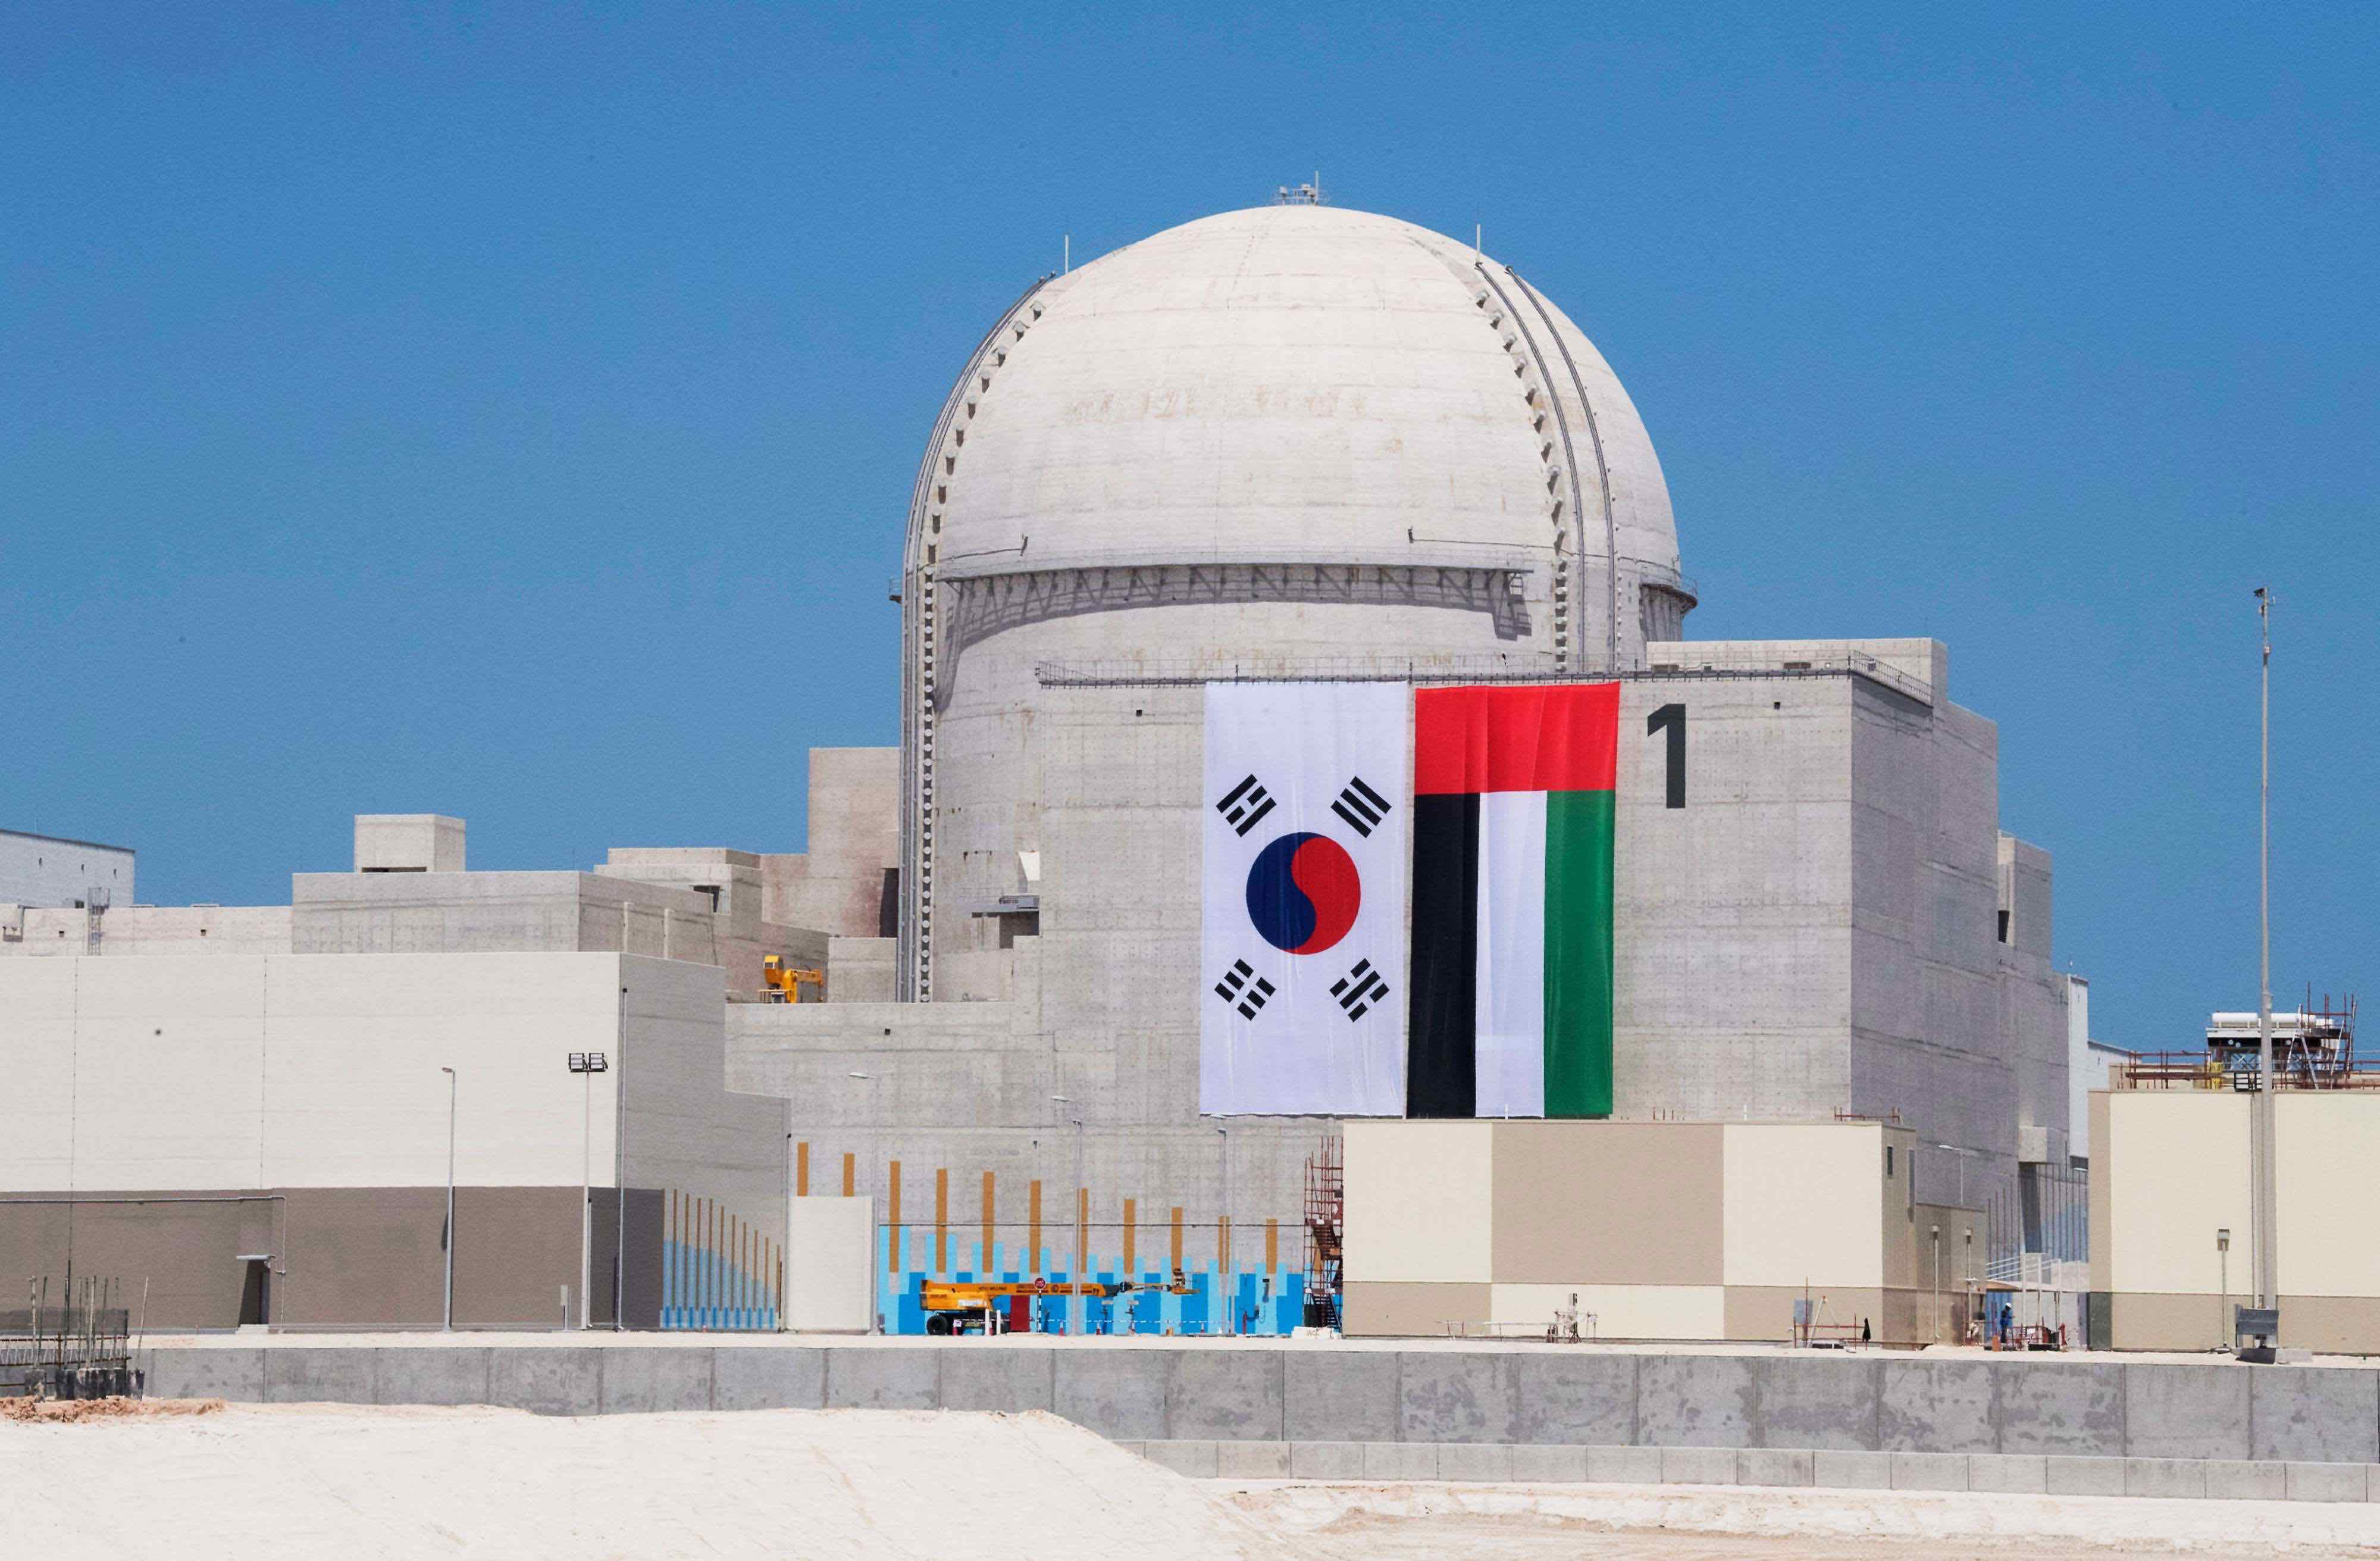 The nuclear plant west of Abu Dhabi was built by a consortium led by the Korea Electric Power Corporation in a deal worth over $20 billion